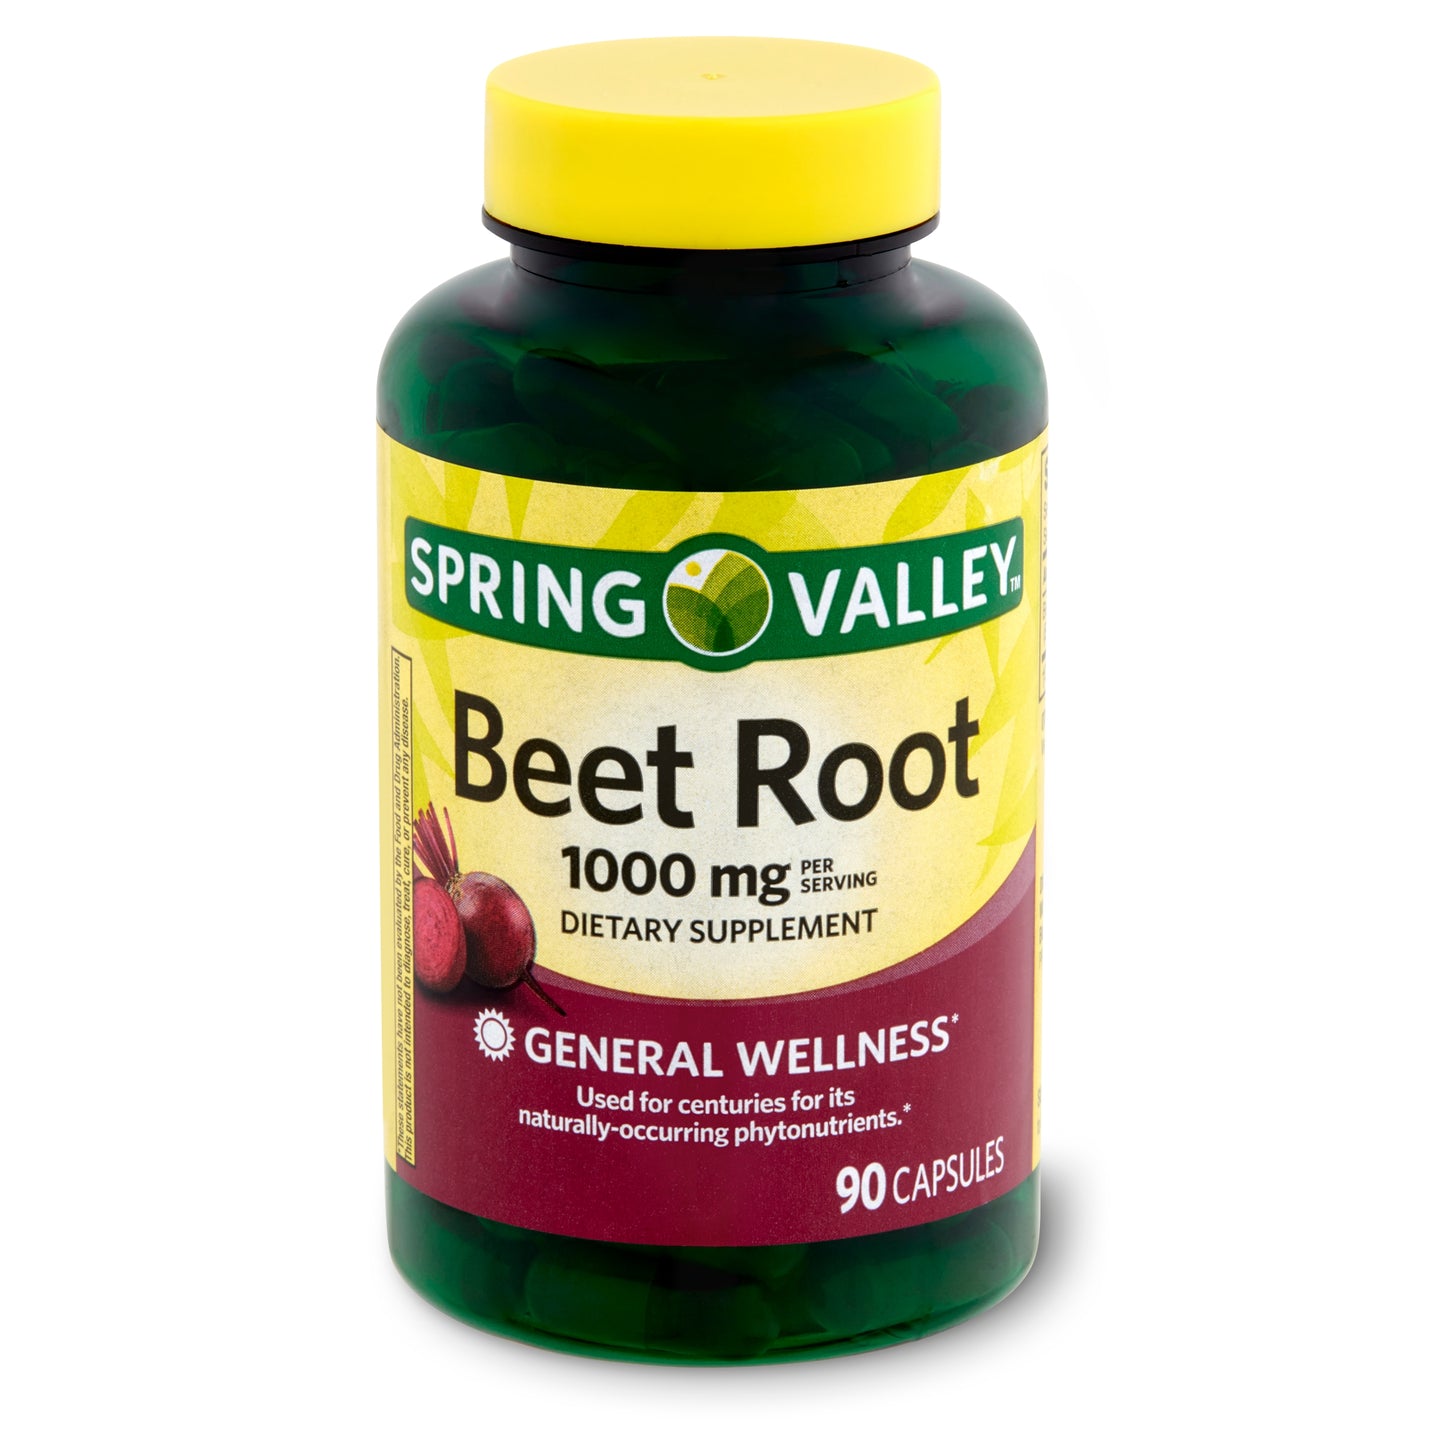 SPRING VALLEY BEET ROOT 1000MG